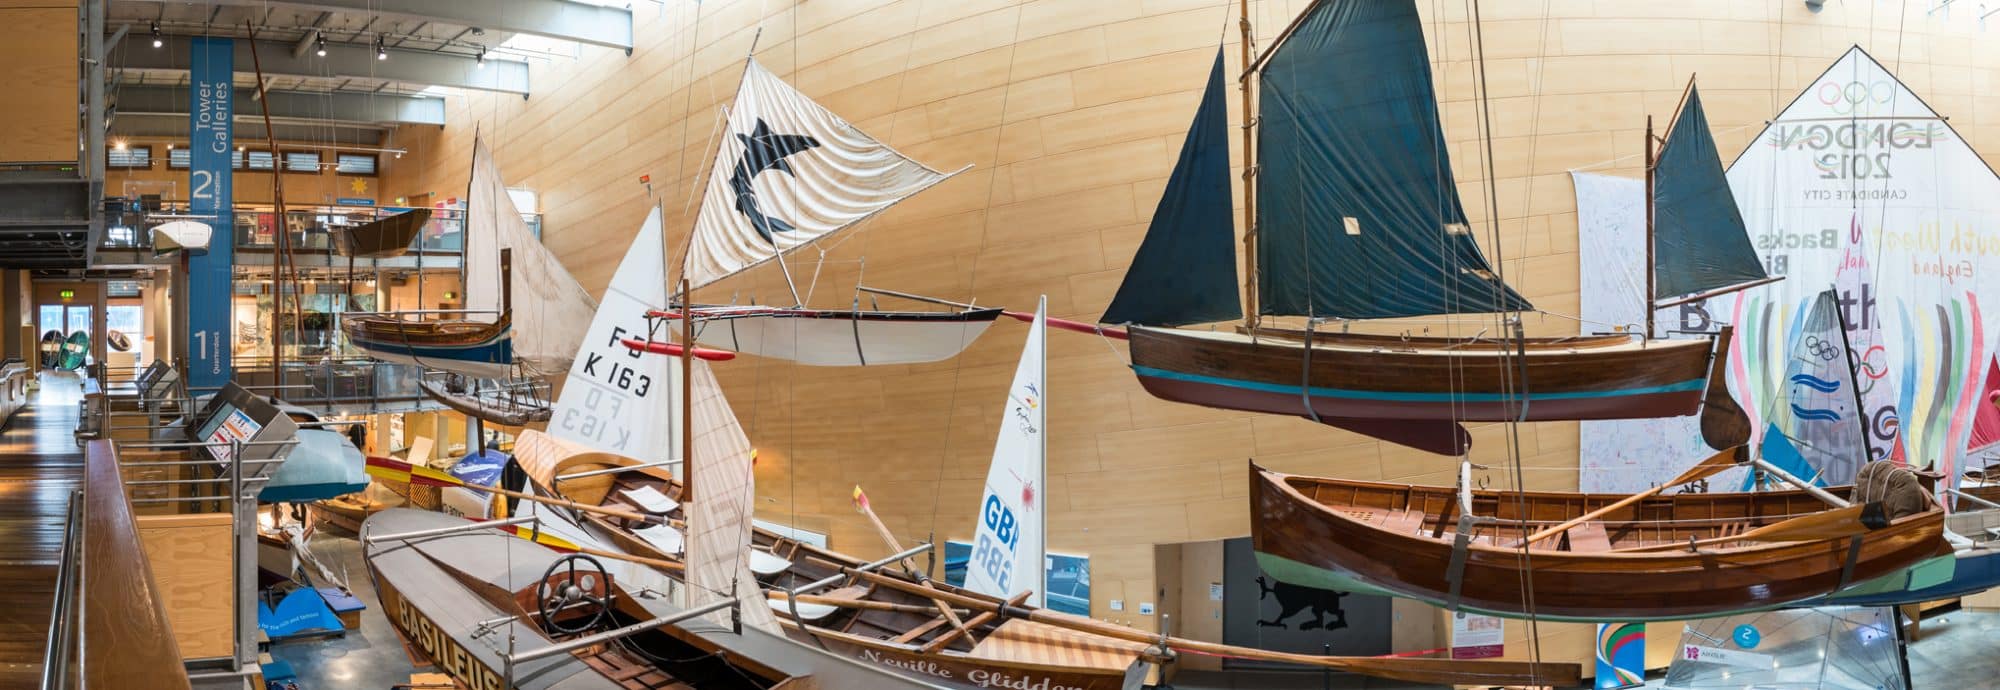 A panorama photo of the flotilla of small boats displayed hanging from the ceiling of the Museum's Main Hall.